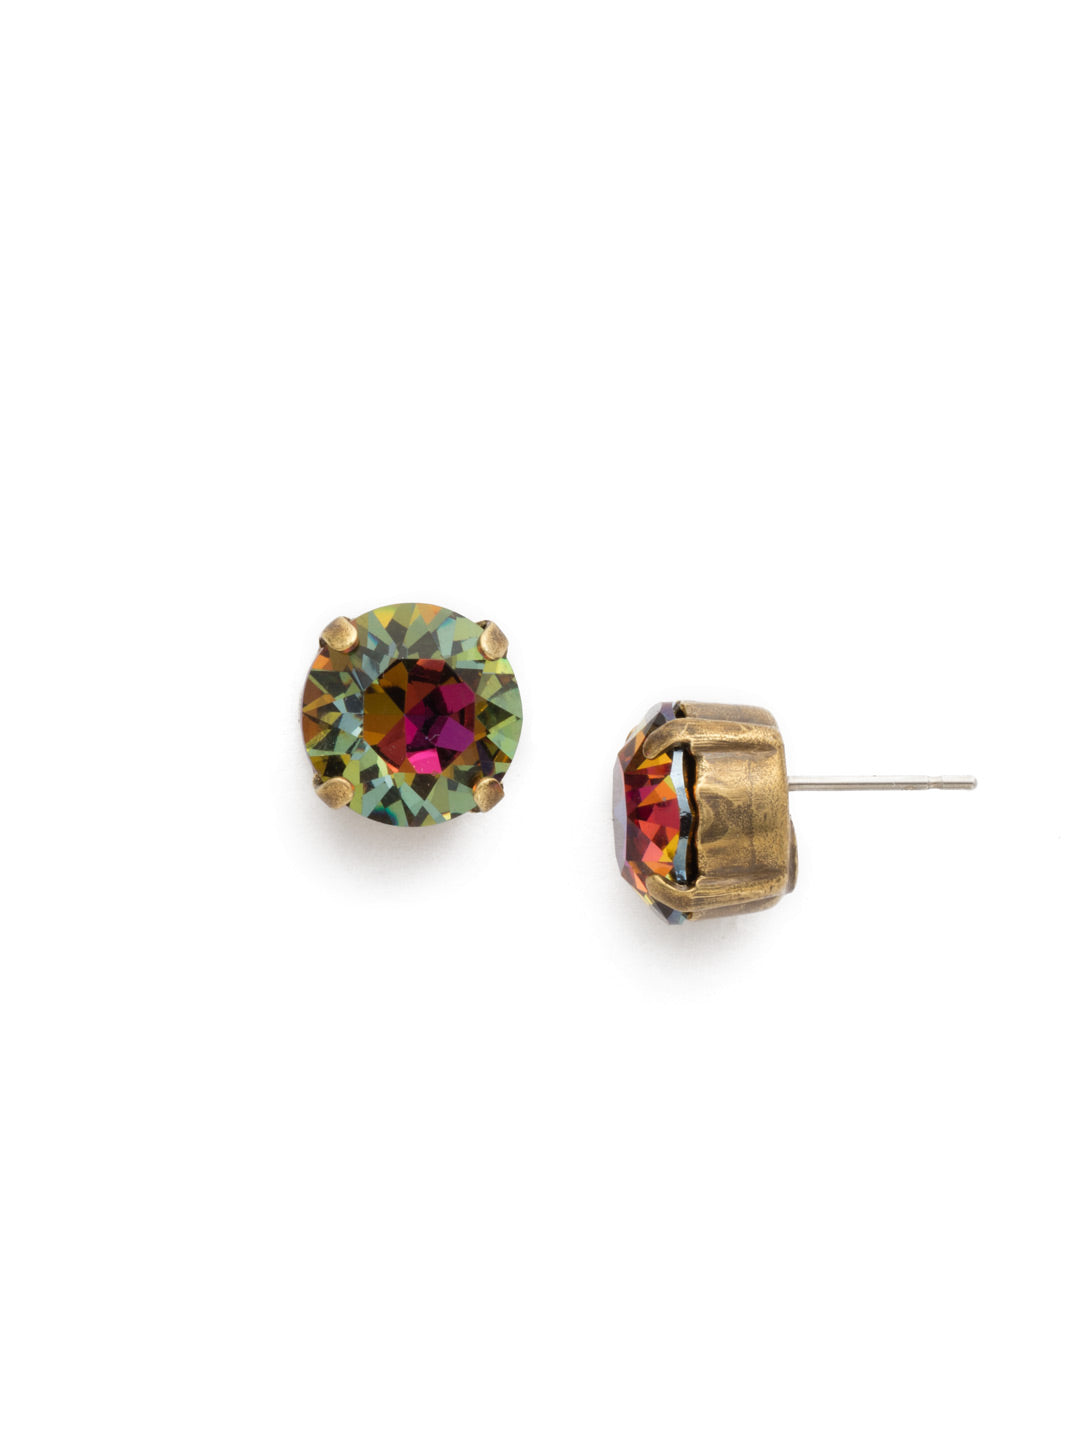 London Stud Earrings - ECM14AGVO - <p>Everyone needs a great pair of studs. Add some classic sparkle to any occasion with these stud earrings. Need help picking a stud? <a href="https://www.sorrelli.com/blogs/sisterhood/round-stud-earrings-101-a-rundown-of-sizes-styles-and-sparkle">Check out our size guide!</a> From Sorrelli's Volcano collection in our Antique Gold-tone finish.</p>